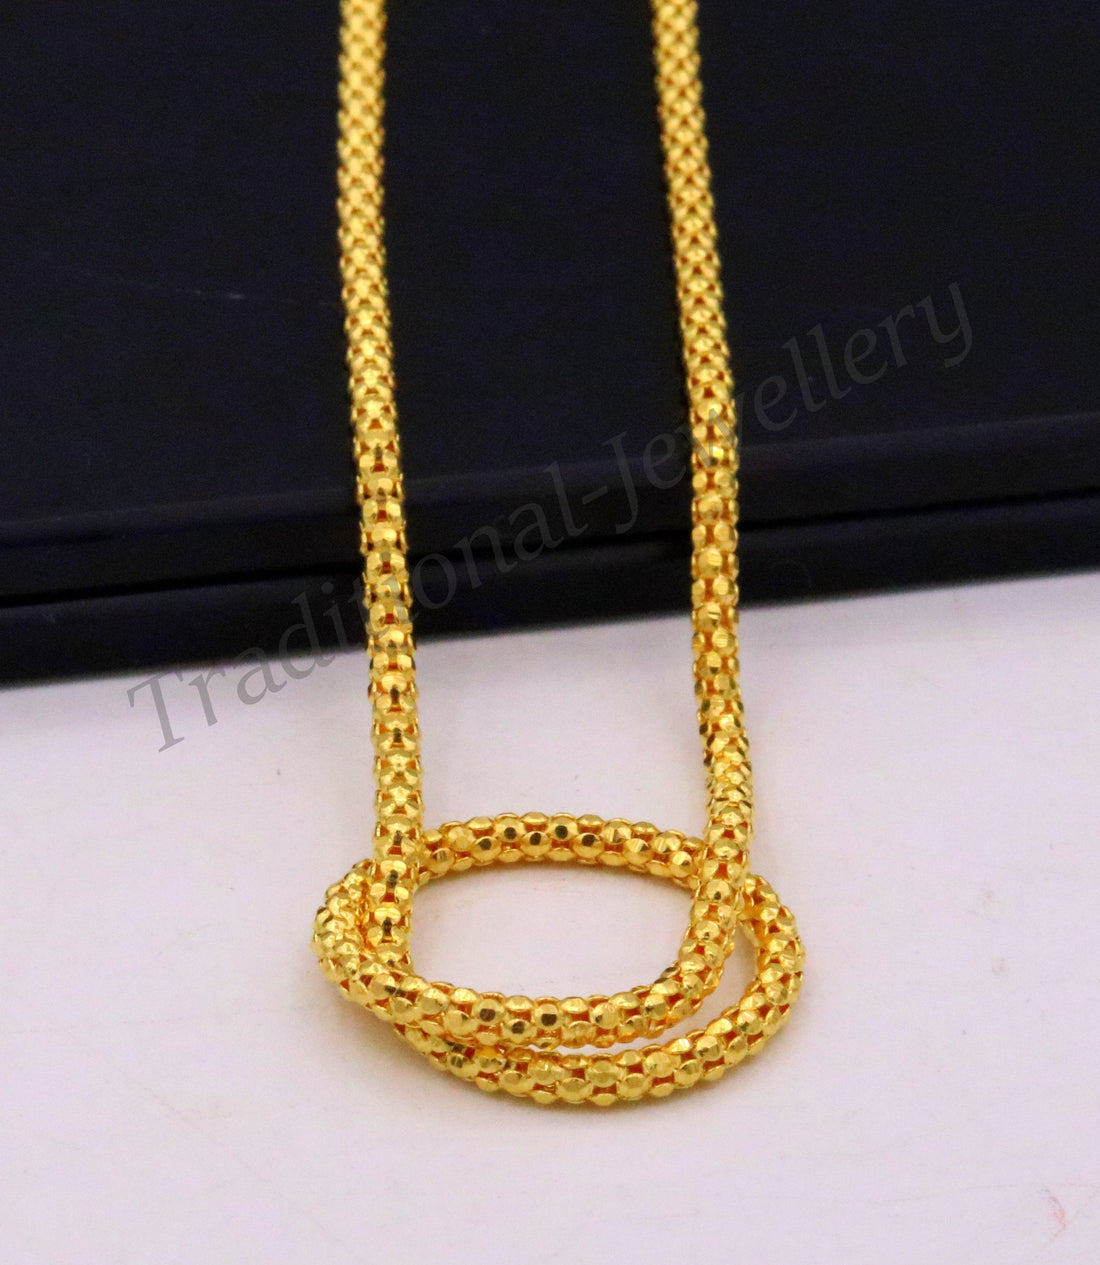 22karat yellow gold handmade unique design chain 20 inches unisex chain necklace from Rajasthan India indian gold jewelry - TRIBAL ORNAMENTS